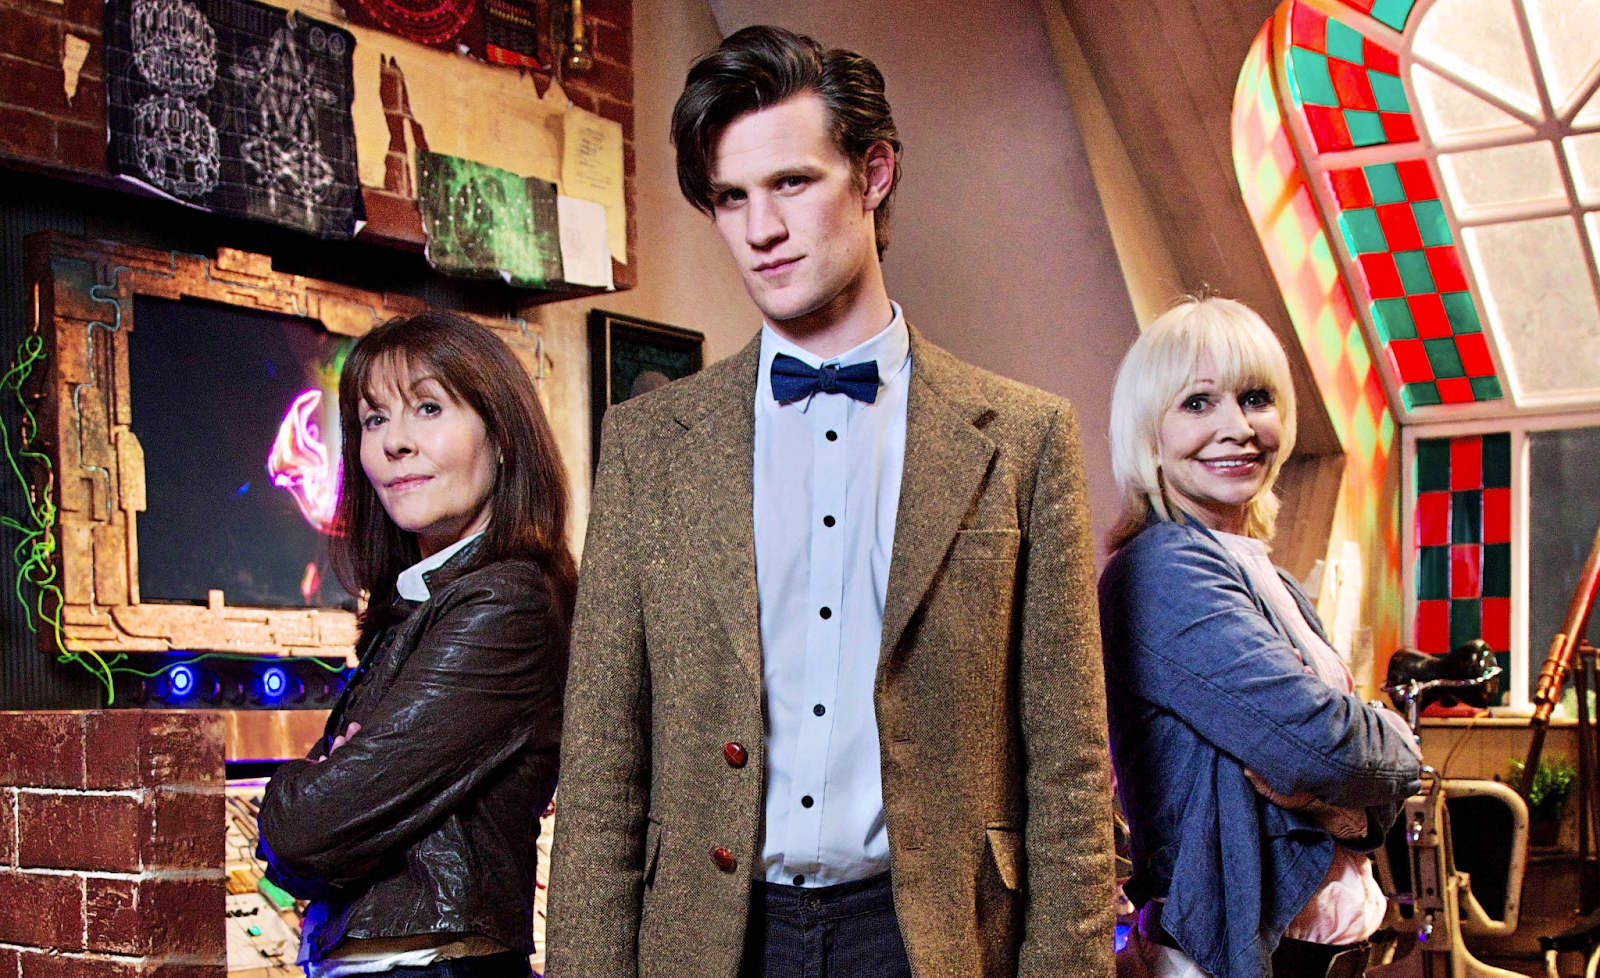 Sarah Jane Smith, The Eleventh Doctor, and Jo Grant